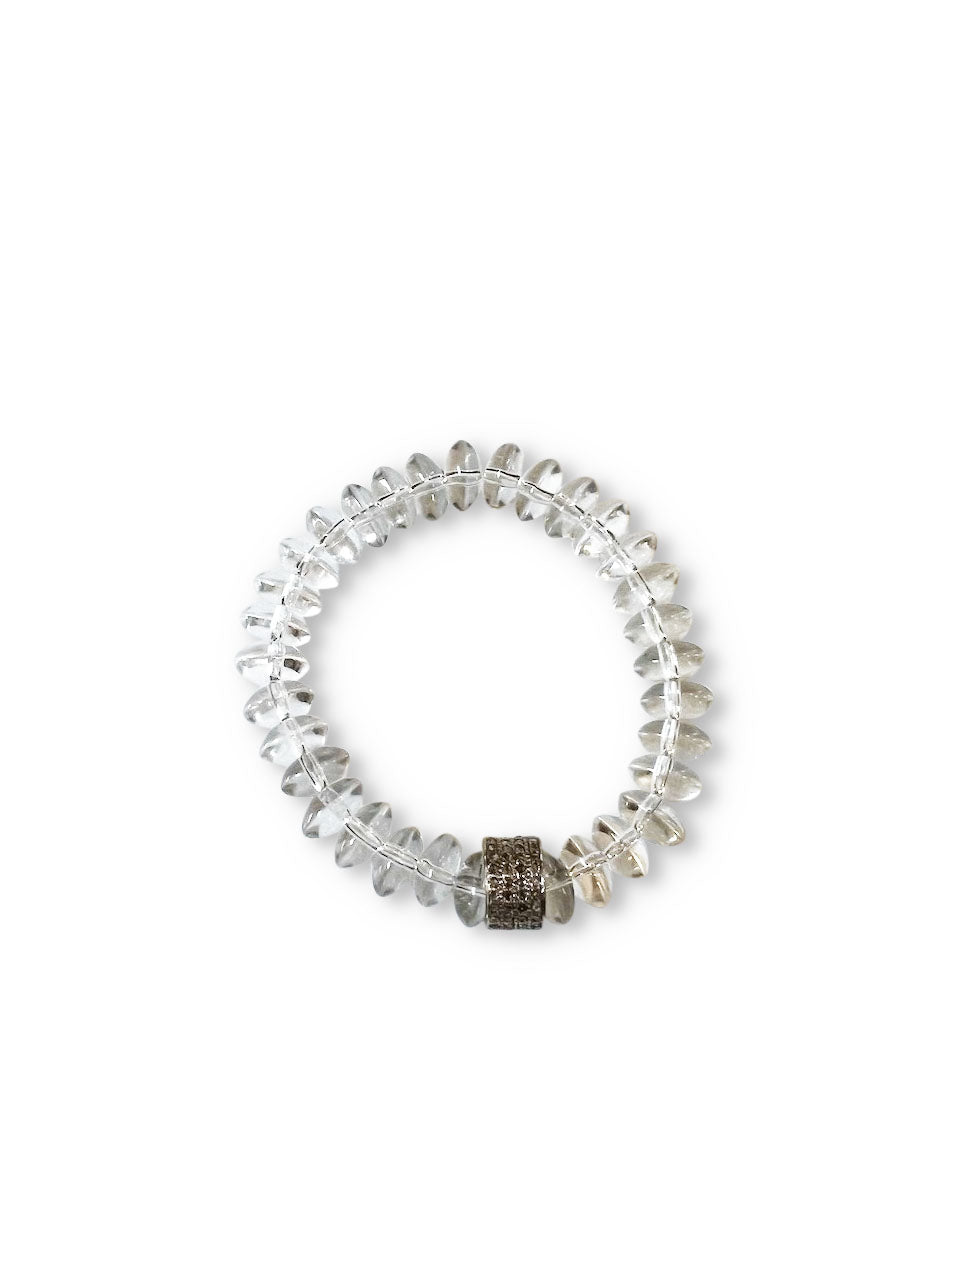 Crystal Quartz Rondelles with Sterling Silver Pave Diamond Bead